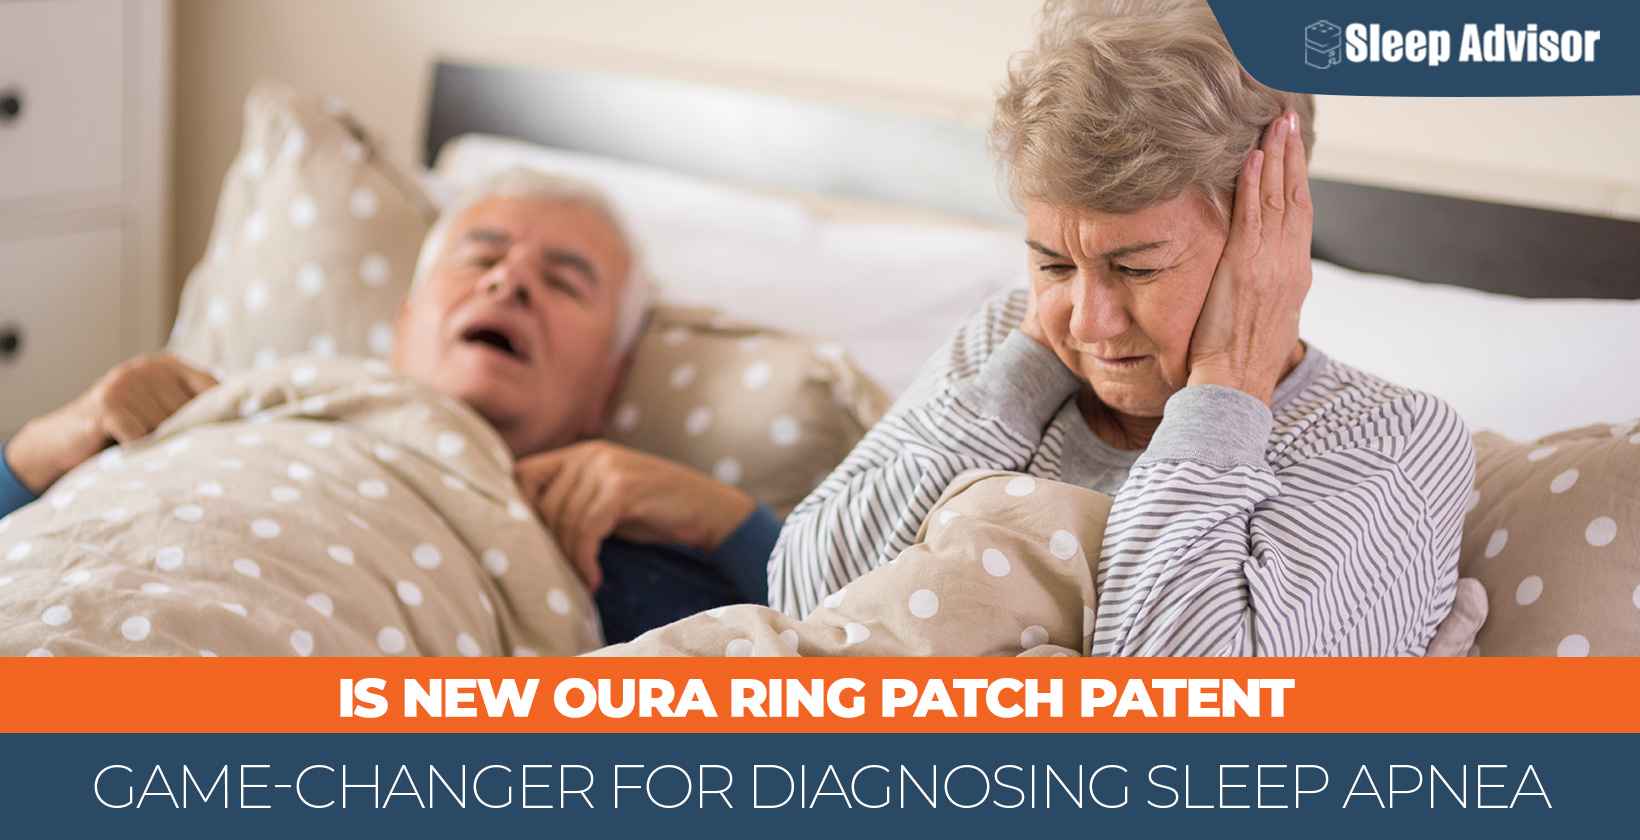 New Oura Ring Patch Patent Could Be a Game-Changer for Diagnosing Sleep Apnea